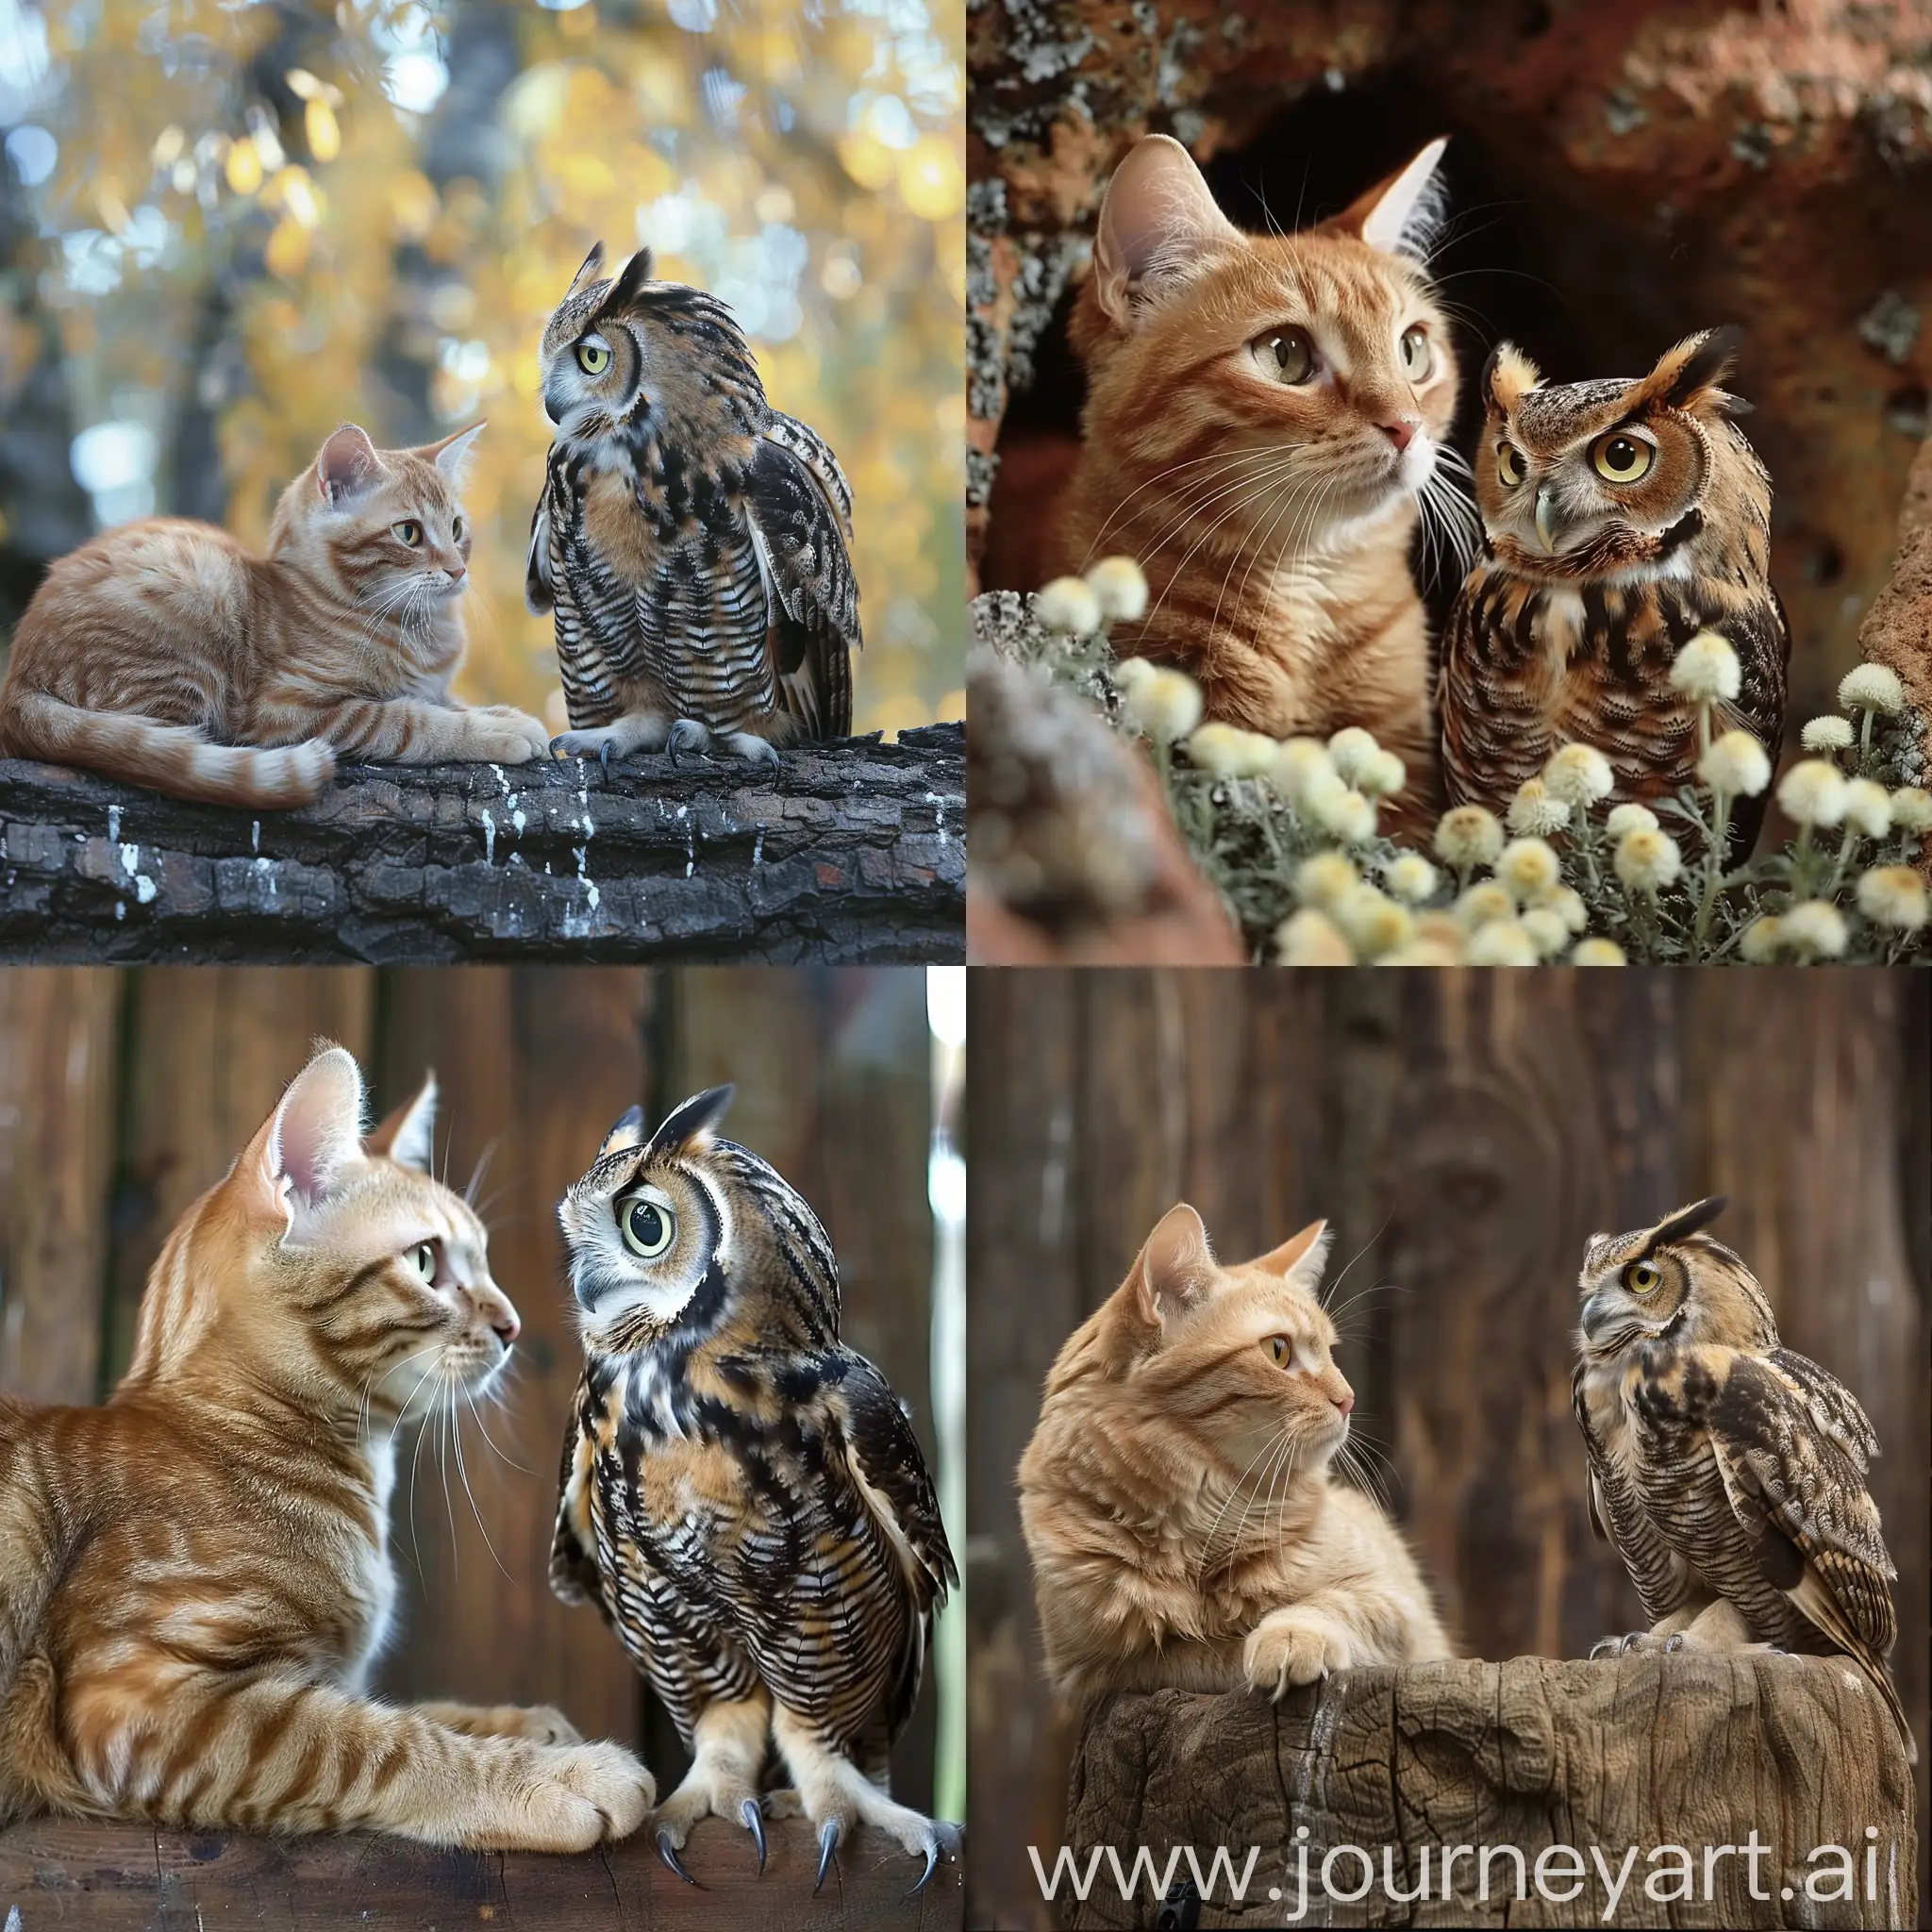 Combine a cat and an owl, National Geographic style photo